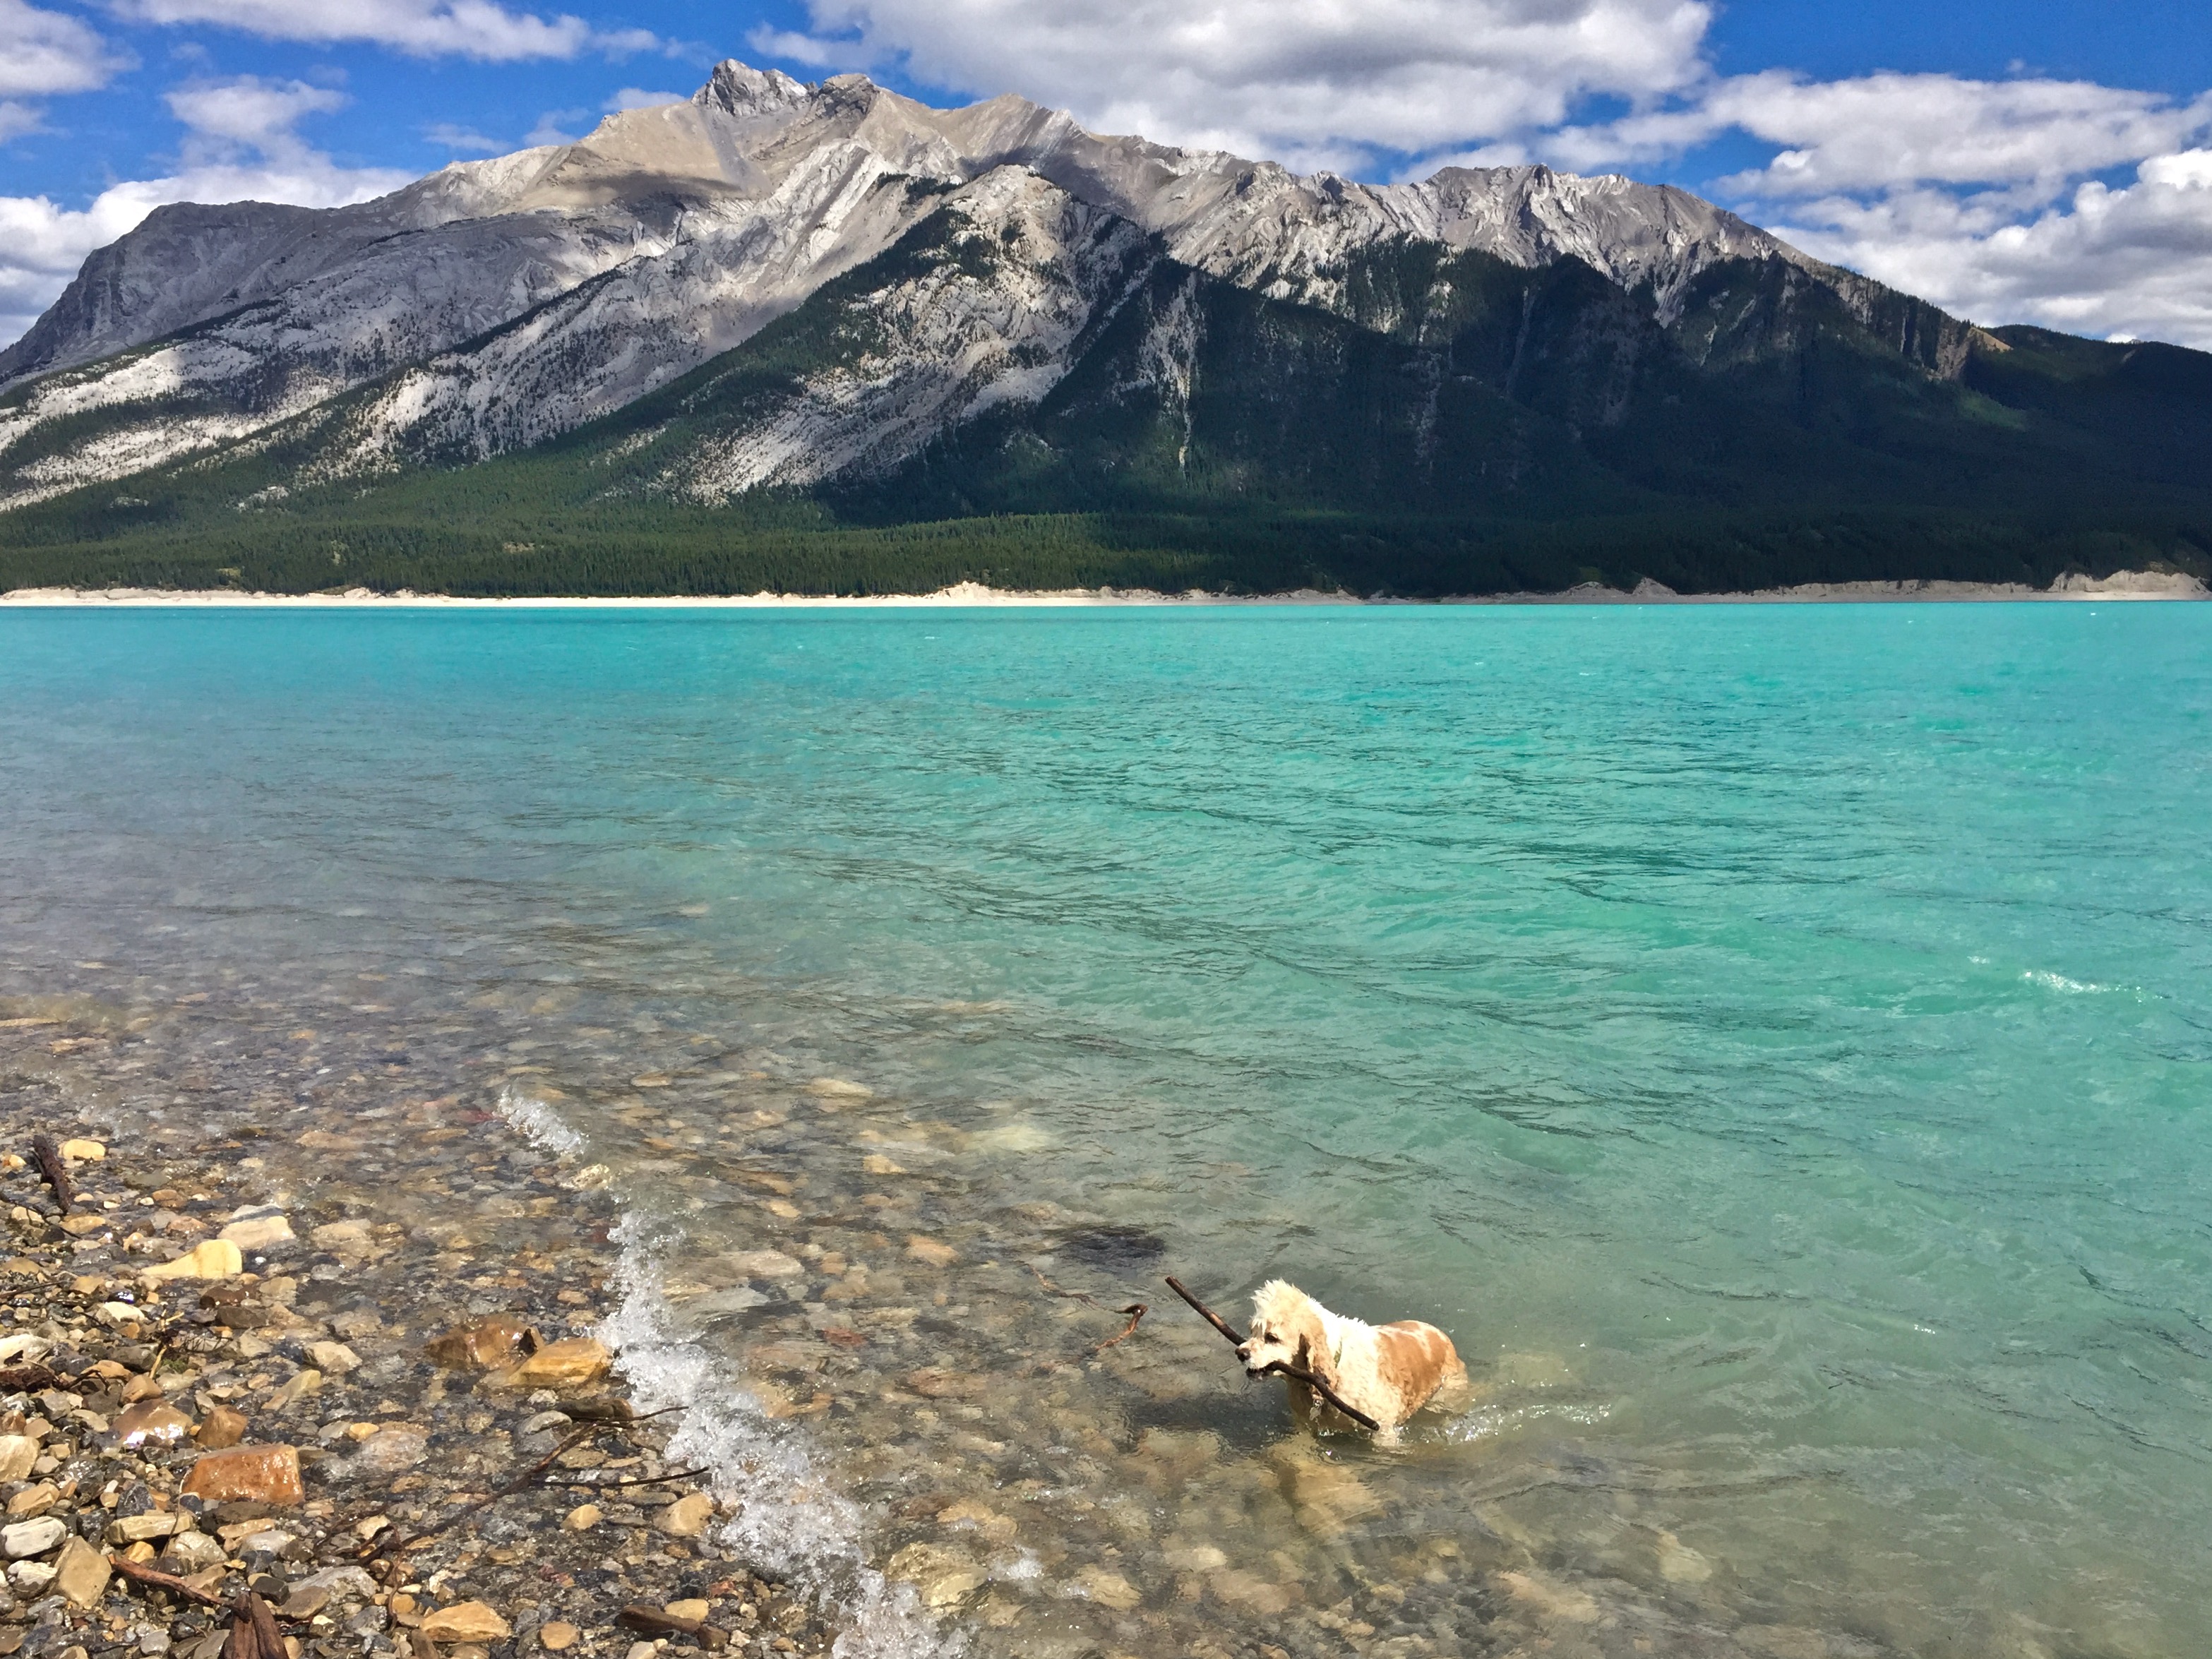 A dog emerges from the aqua-colored waters of a glacial lake.